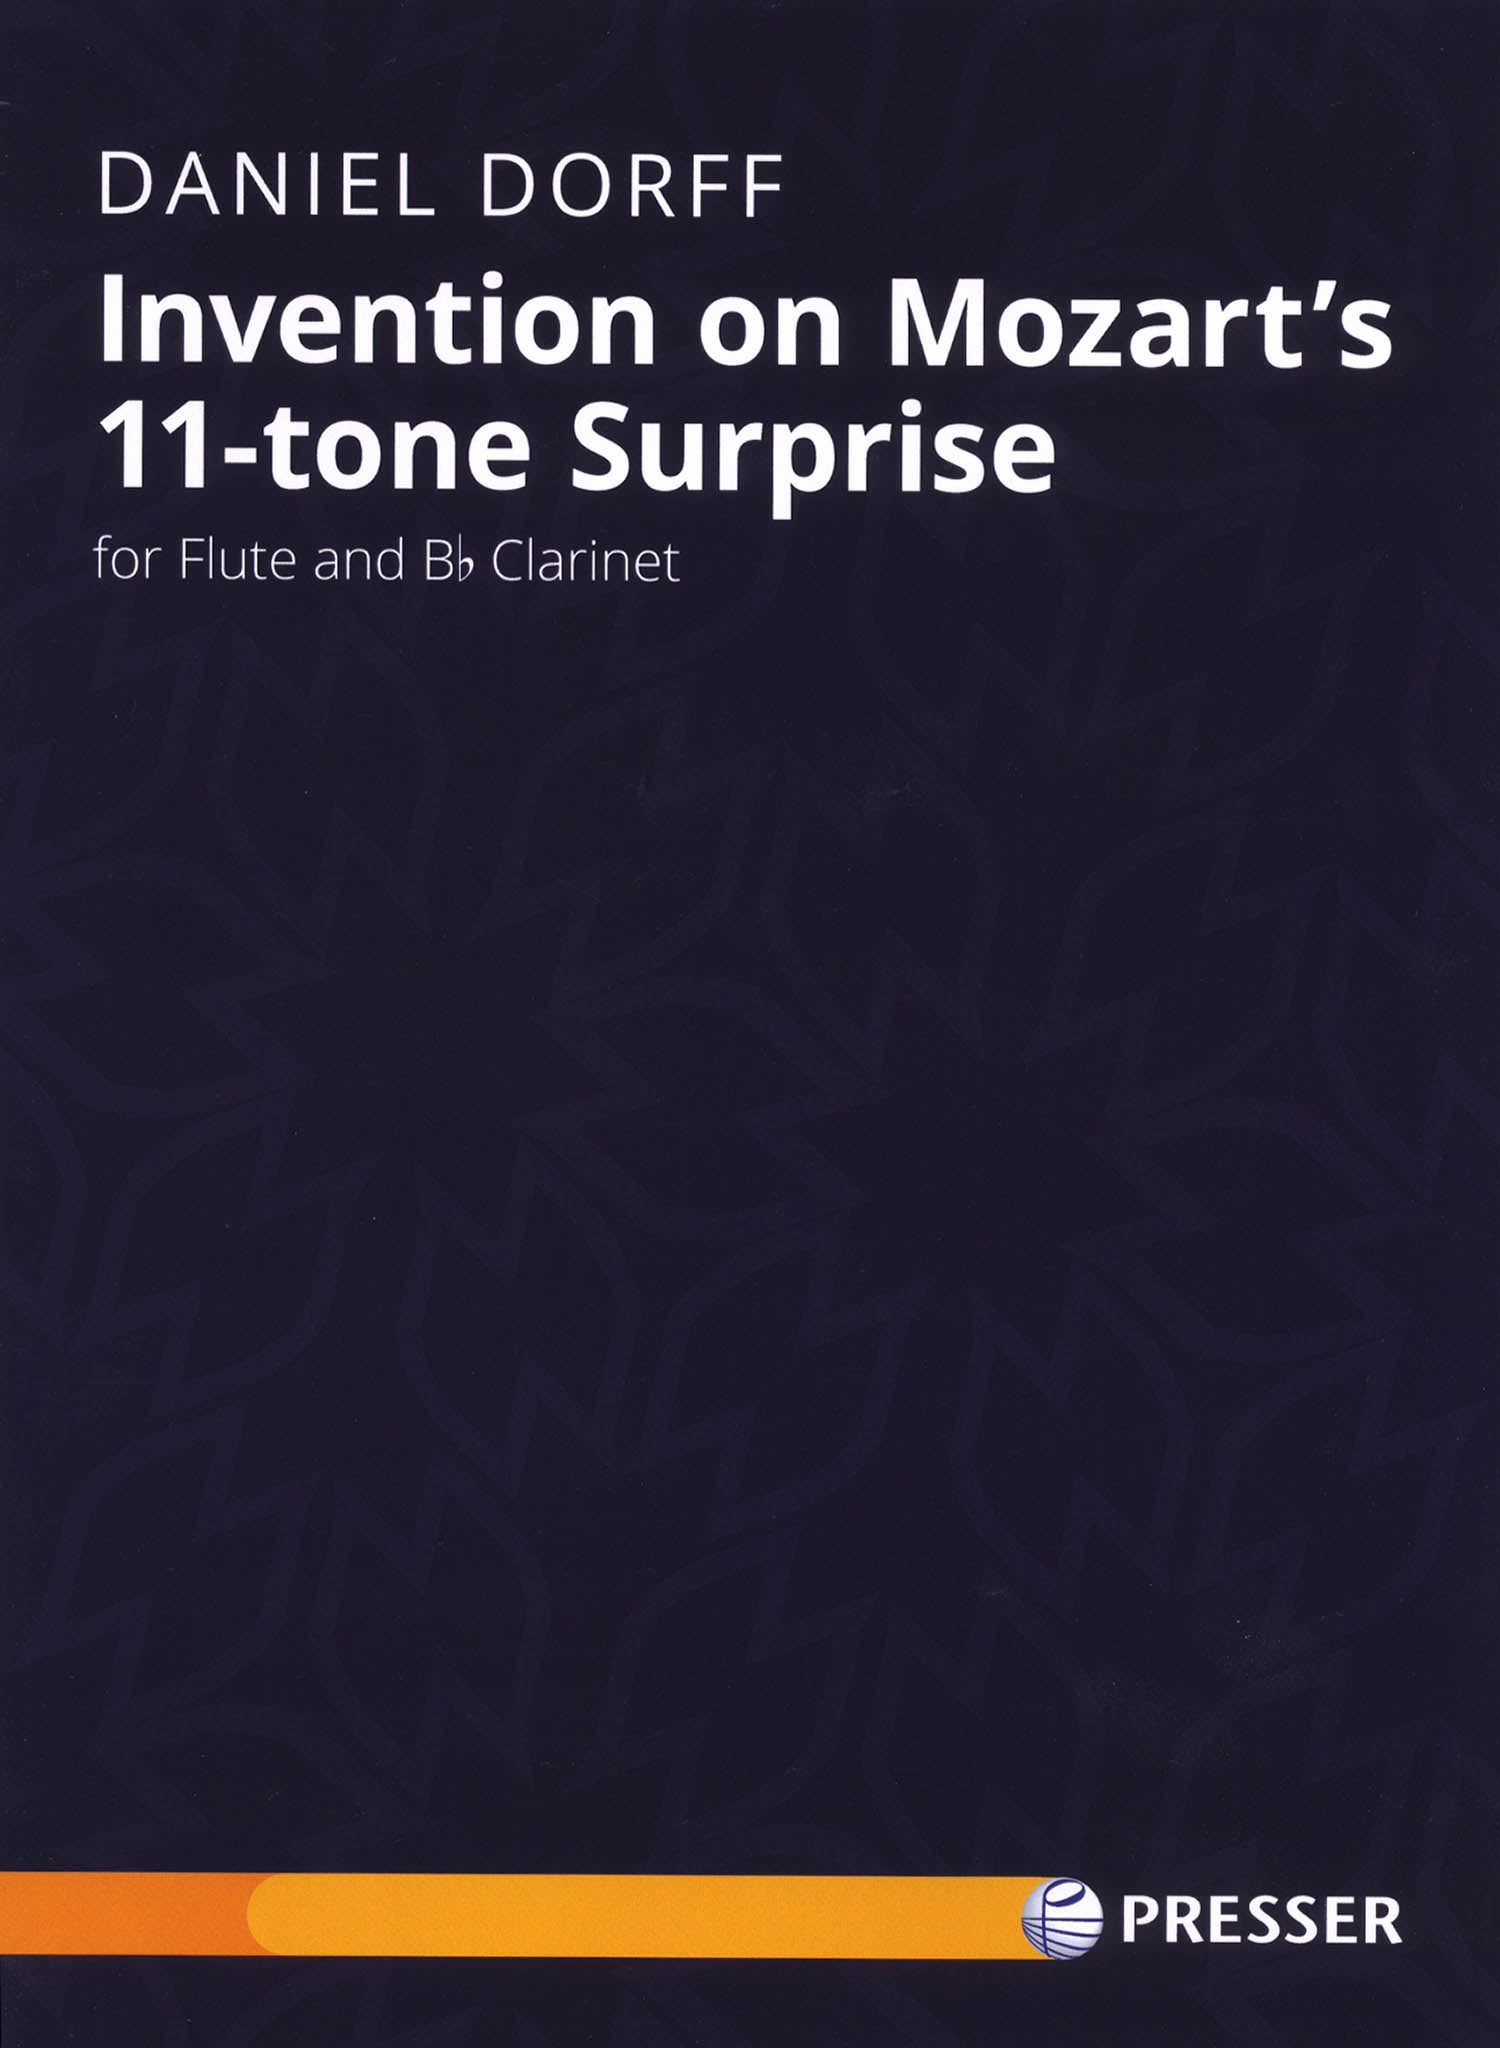 Daniel Dorff Invention on Mozart’s 11-tone Surprise flute and clarinet duet cover